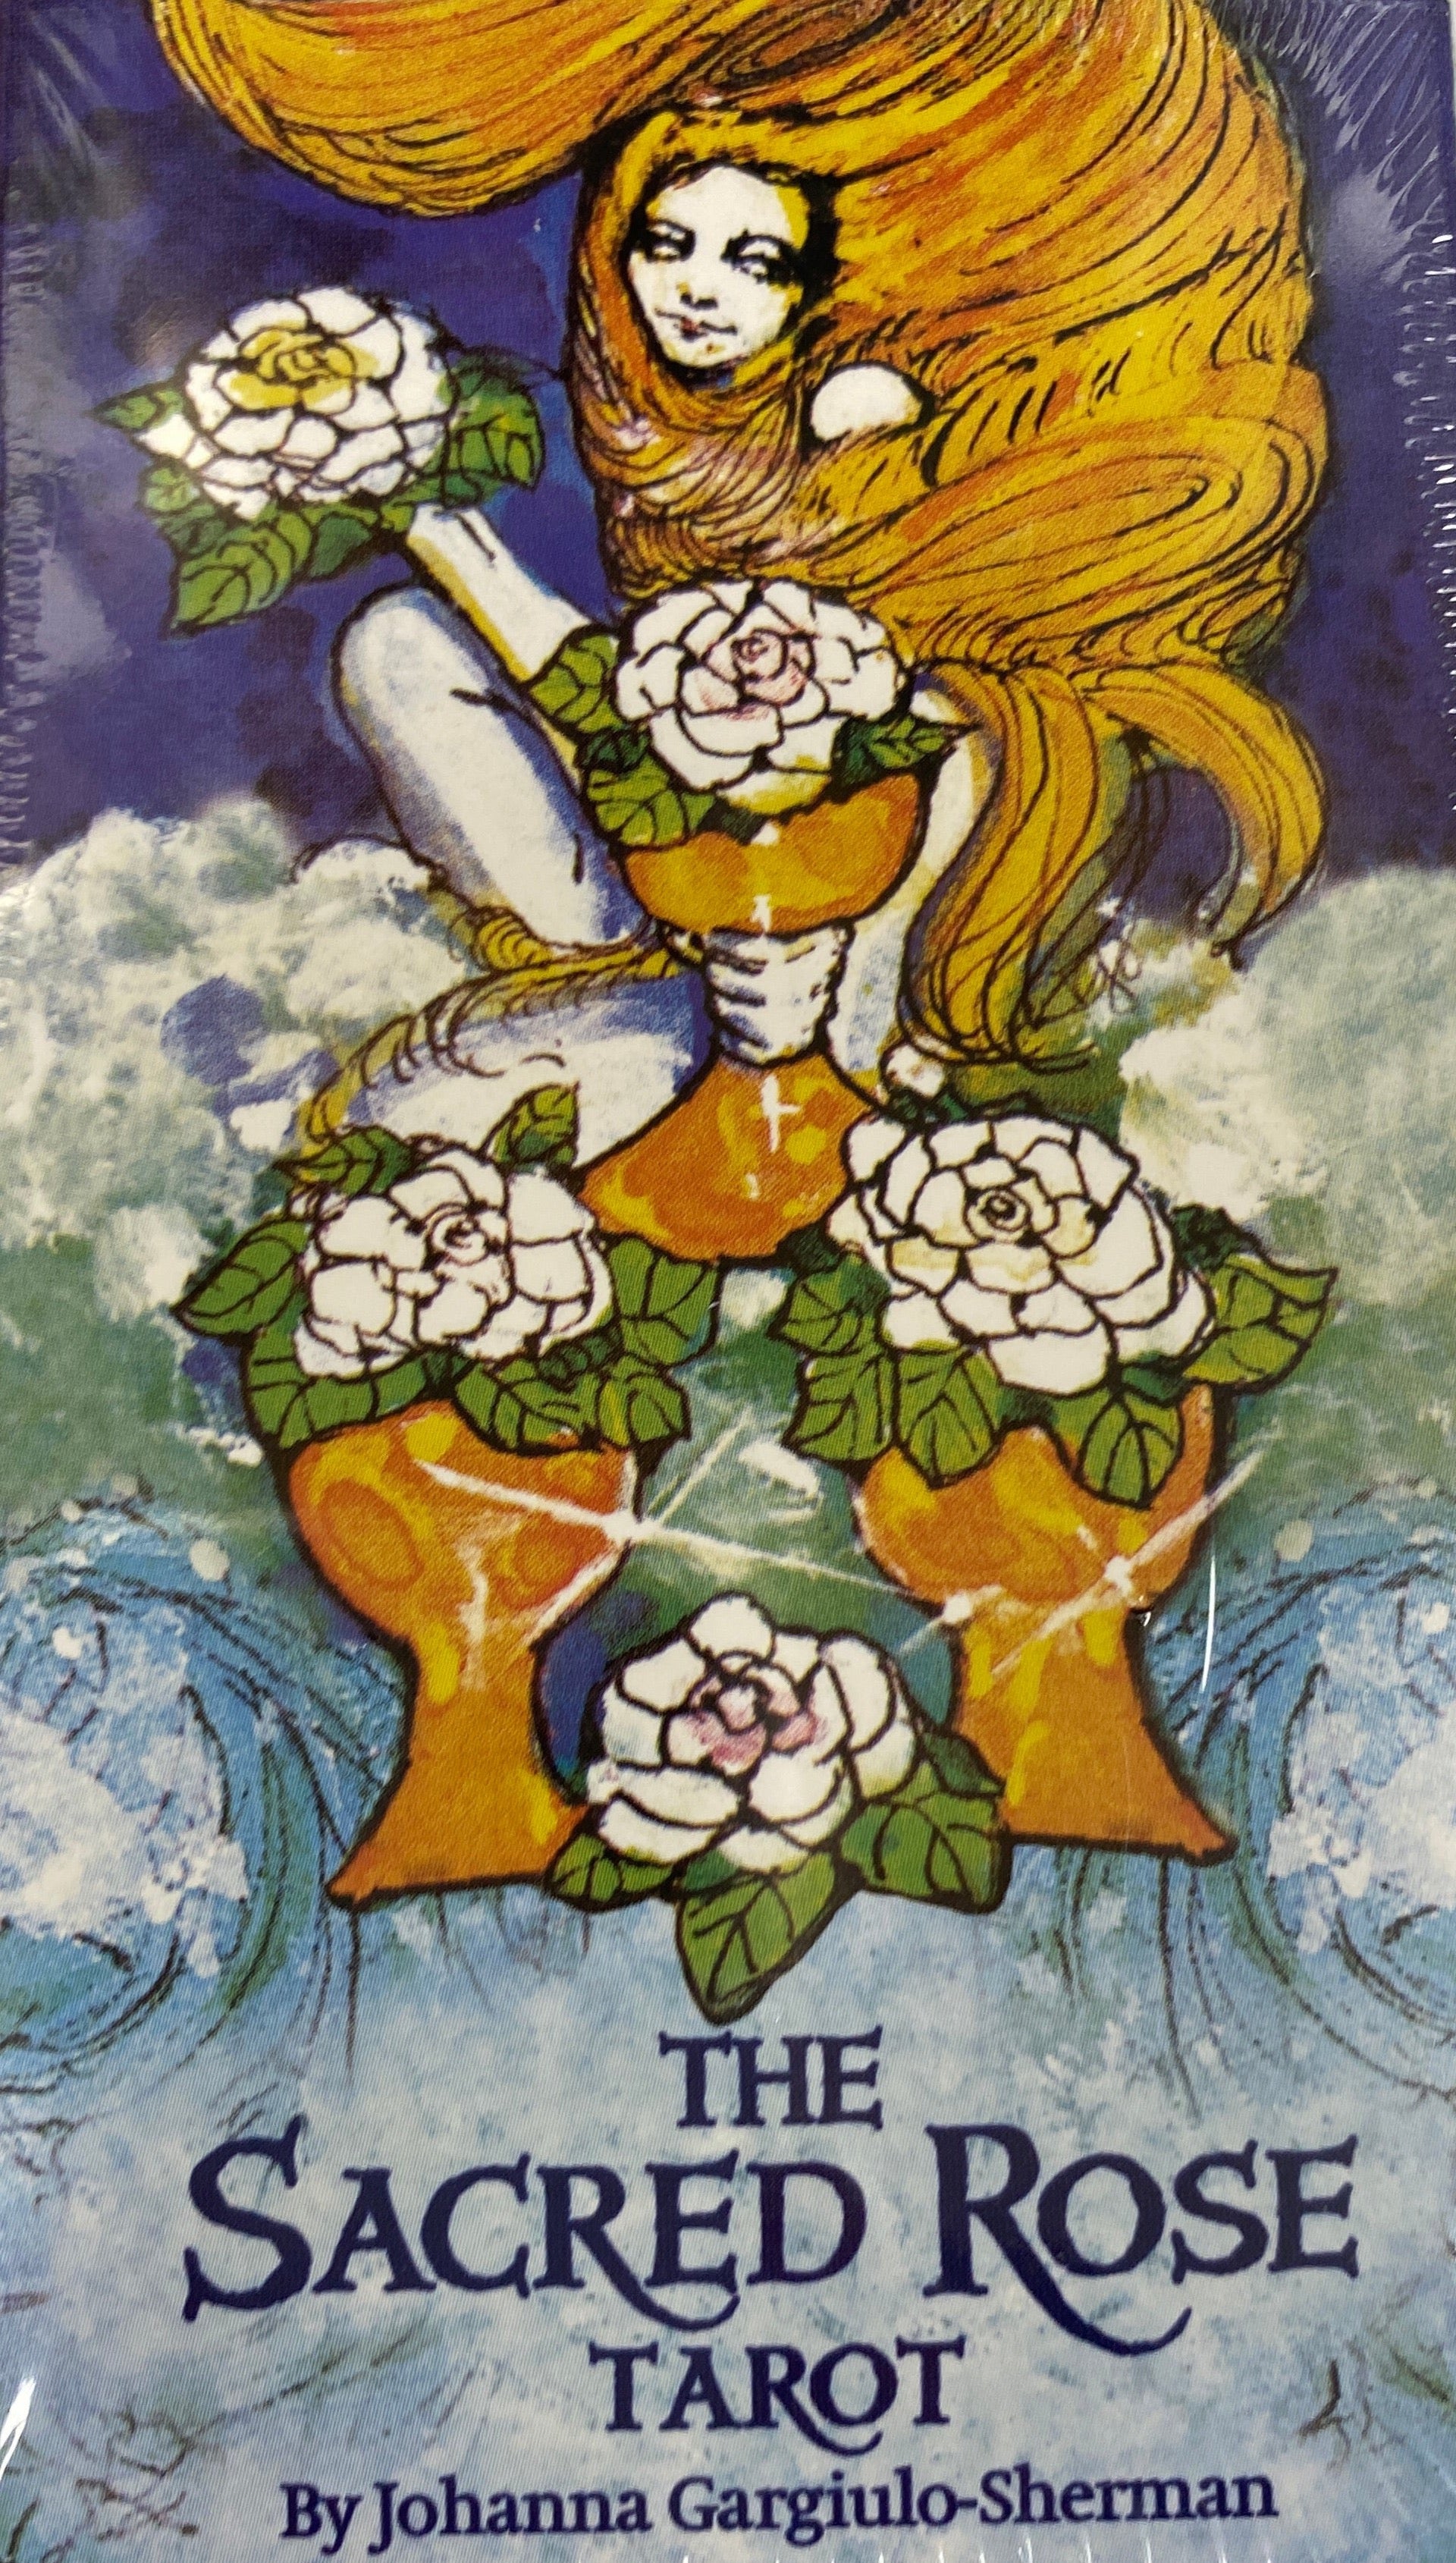 Blue colored deckmplckage with image of woman with long hair holding cup with flowers 